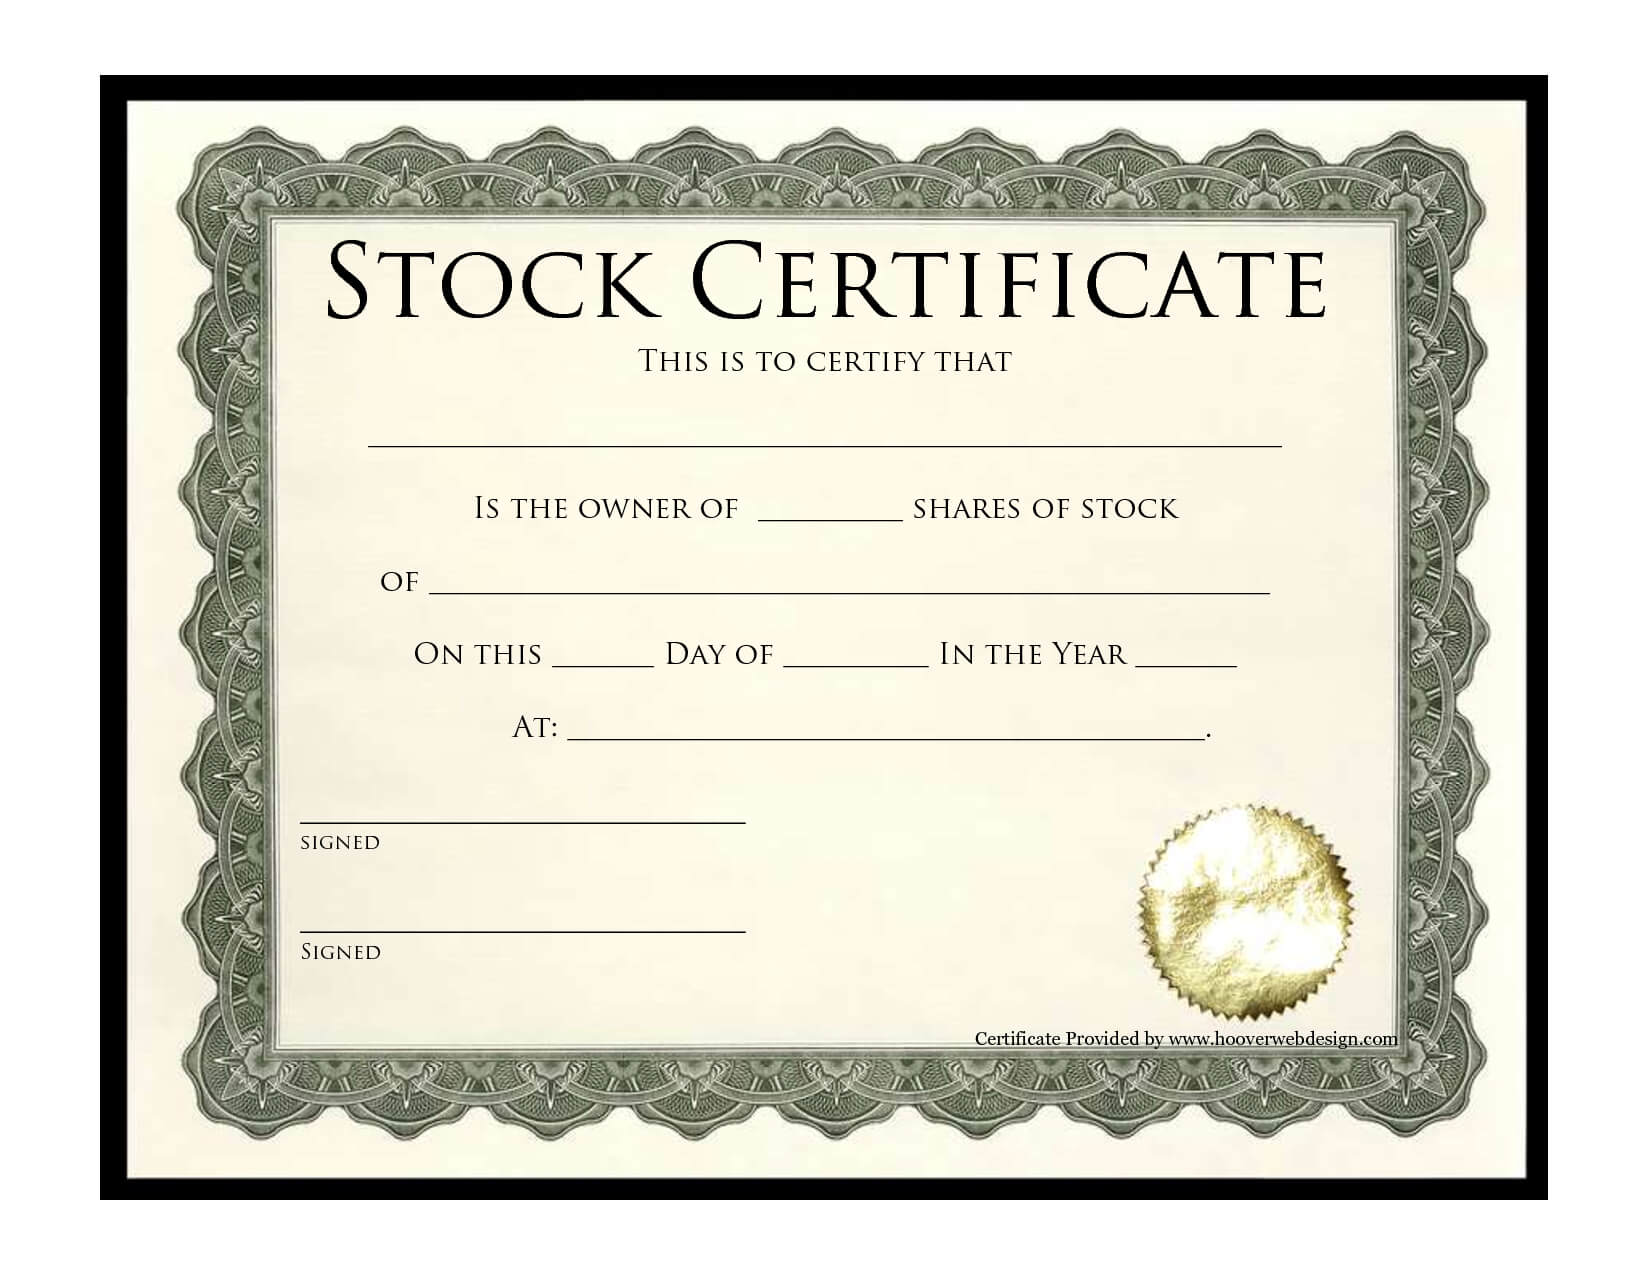 Stock Certificate Template | Best Template Collection Intended For Corporate Bond Certificate Template